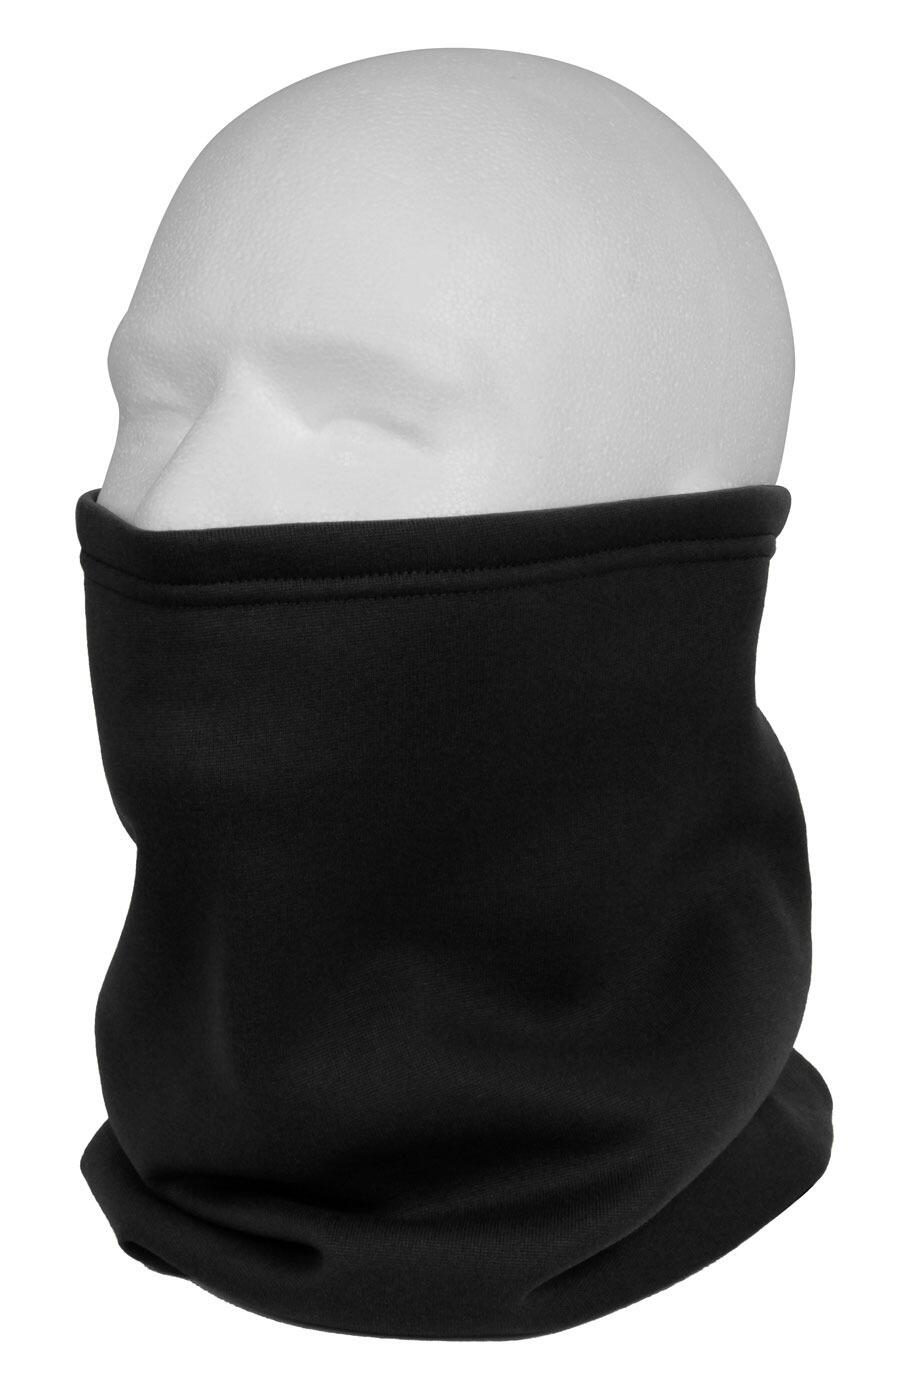 Rothco Extreme Cold Weather (ECWCS) Neck Gaiter - Black - shown on head